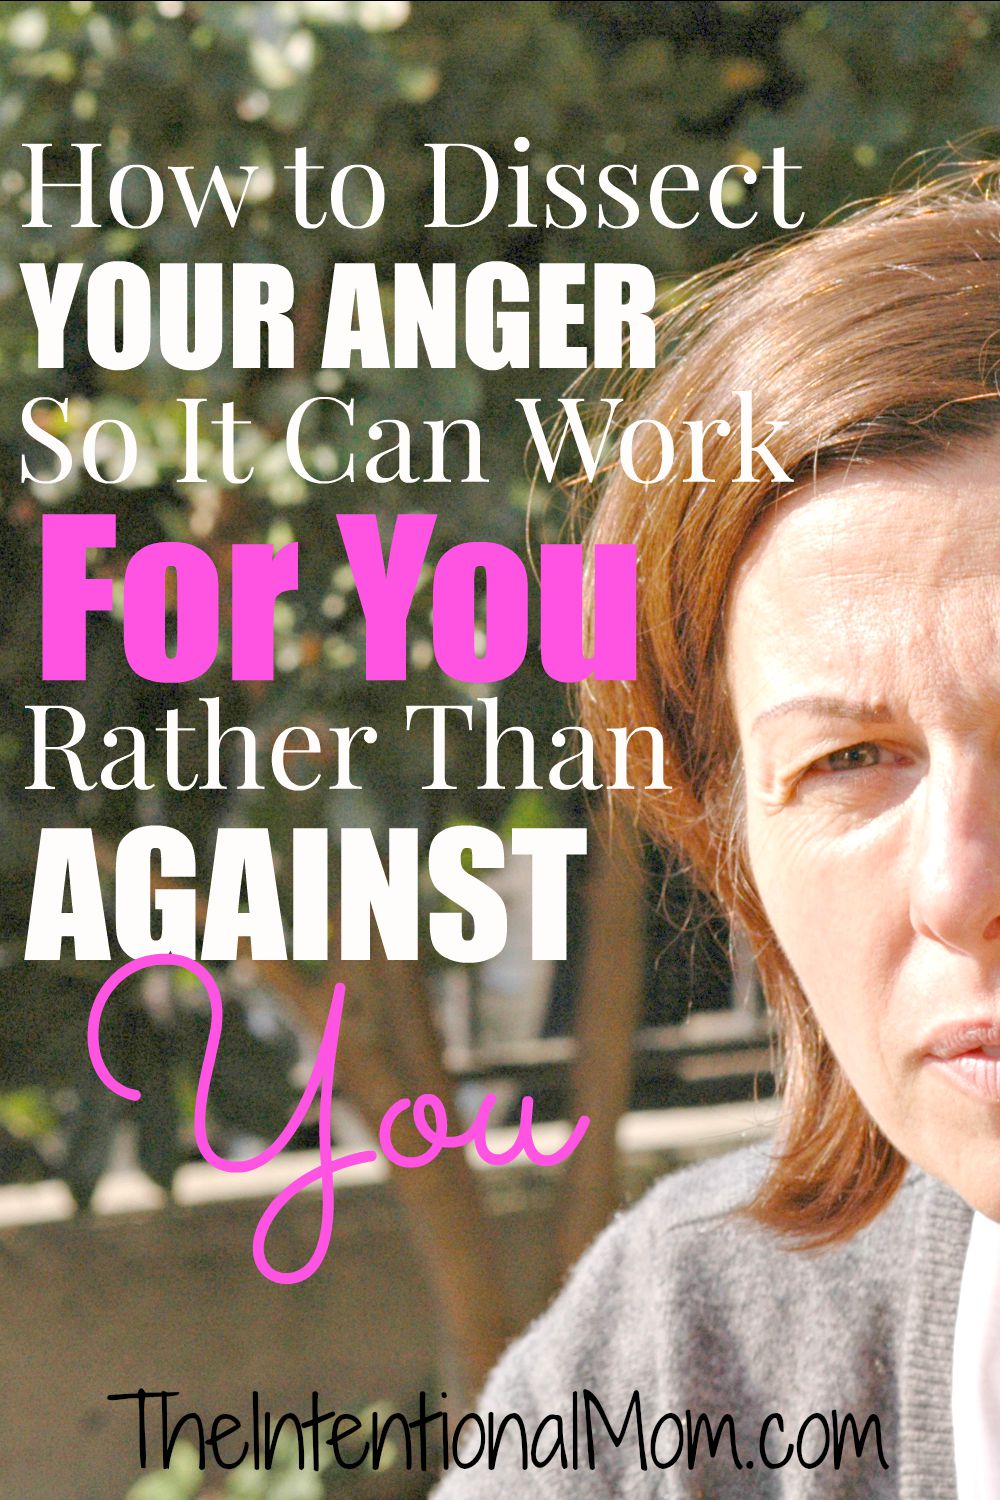 How to Dissect Your Anger So It Can Work For You Rather Than Against You